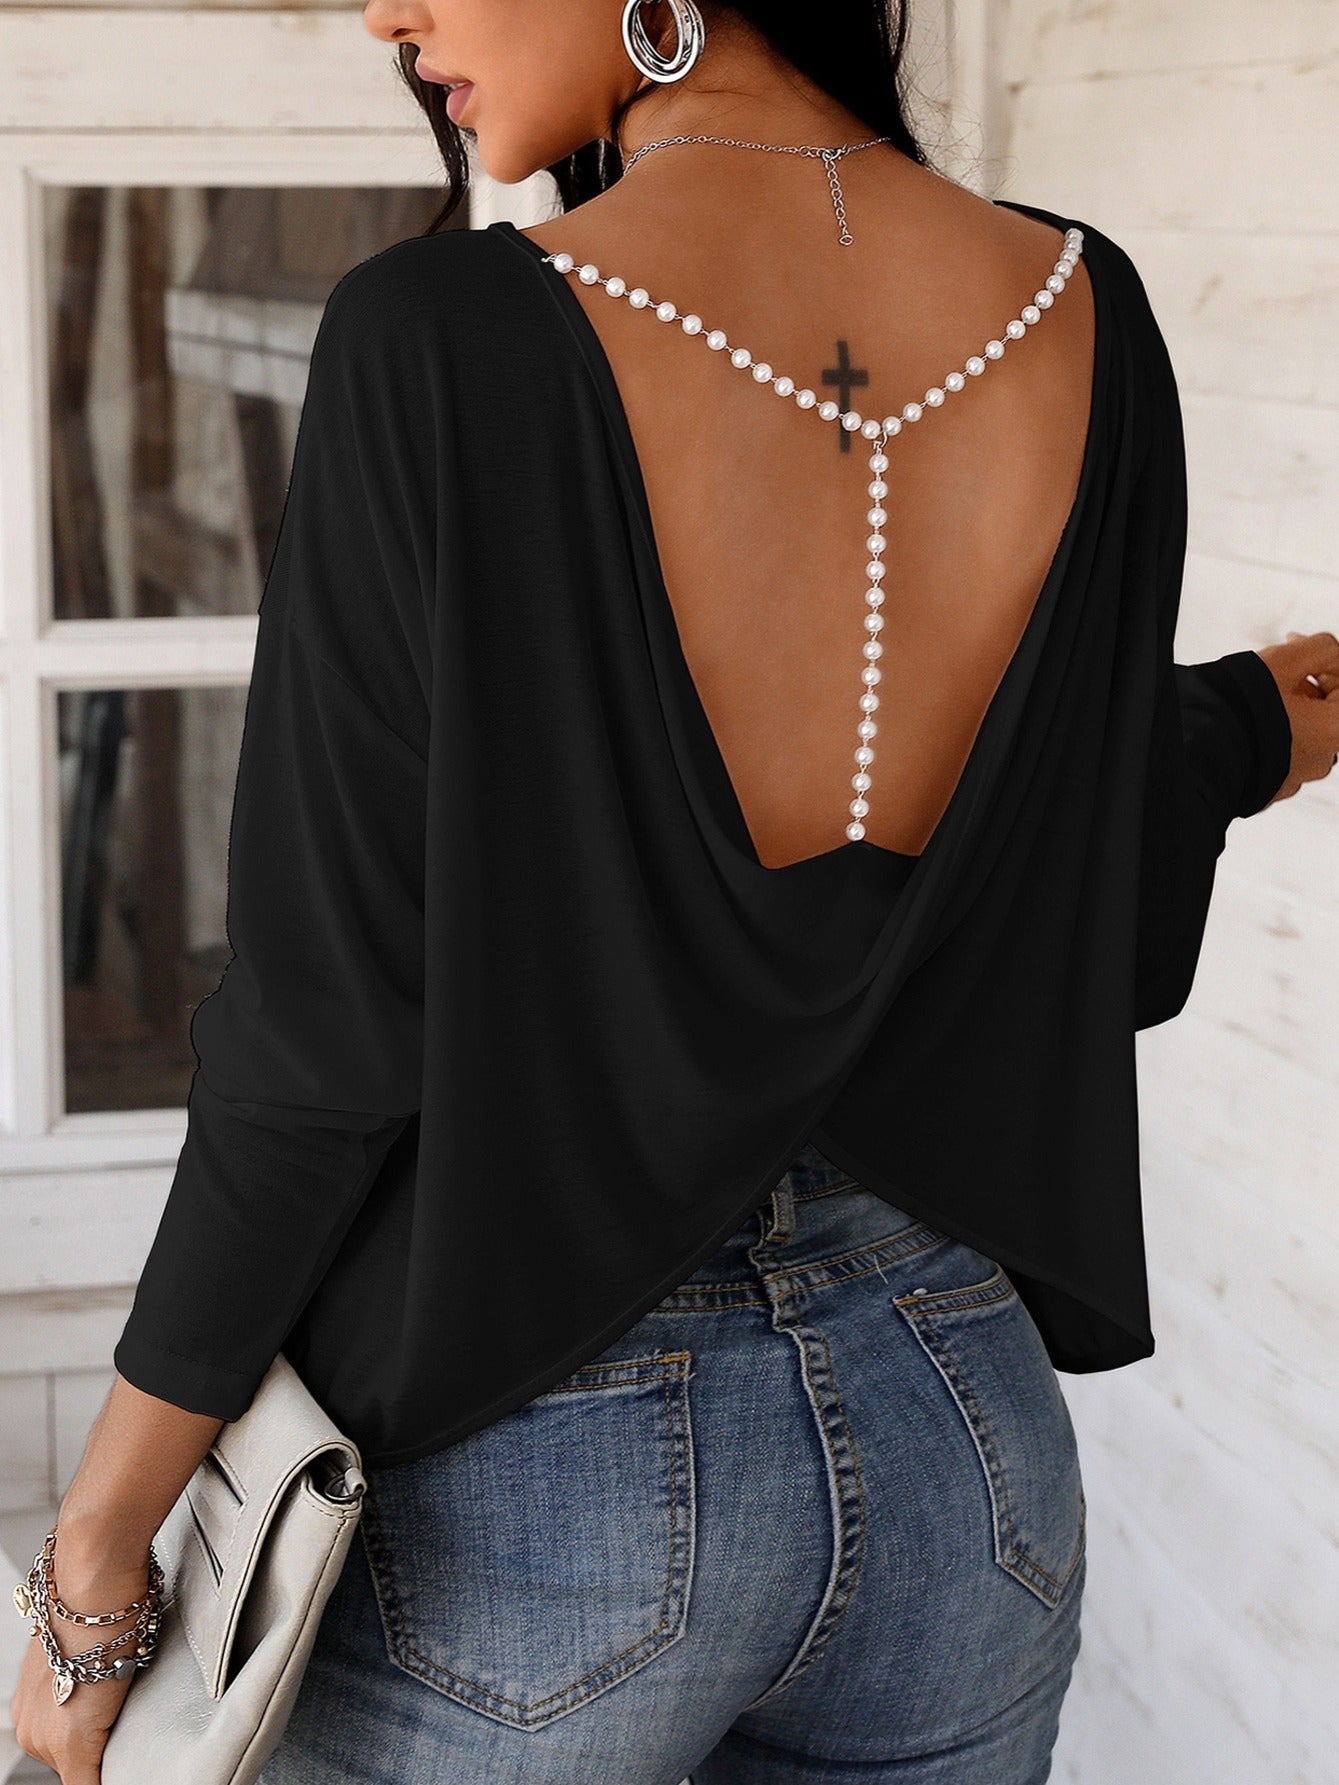 kkboxly  Black Open Back Blouse, Beaded Strap Asymmetric Boat Neck Top, Elegant Casual Tops For All Occasions, Women's Clothing